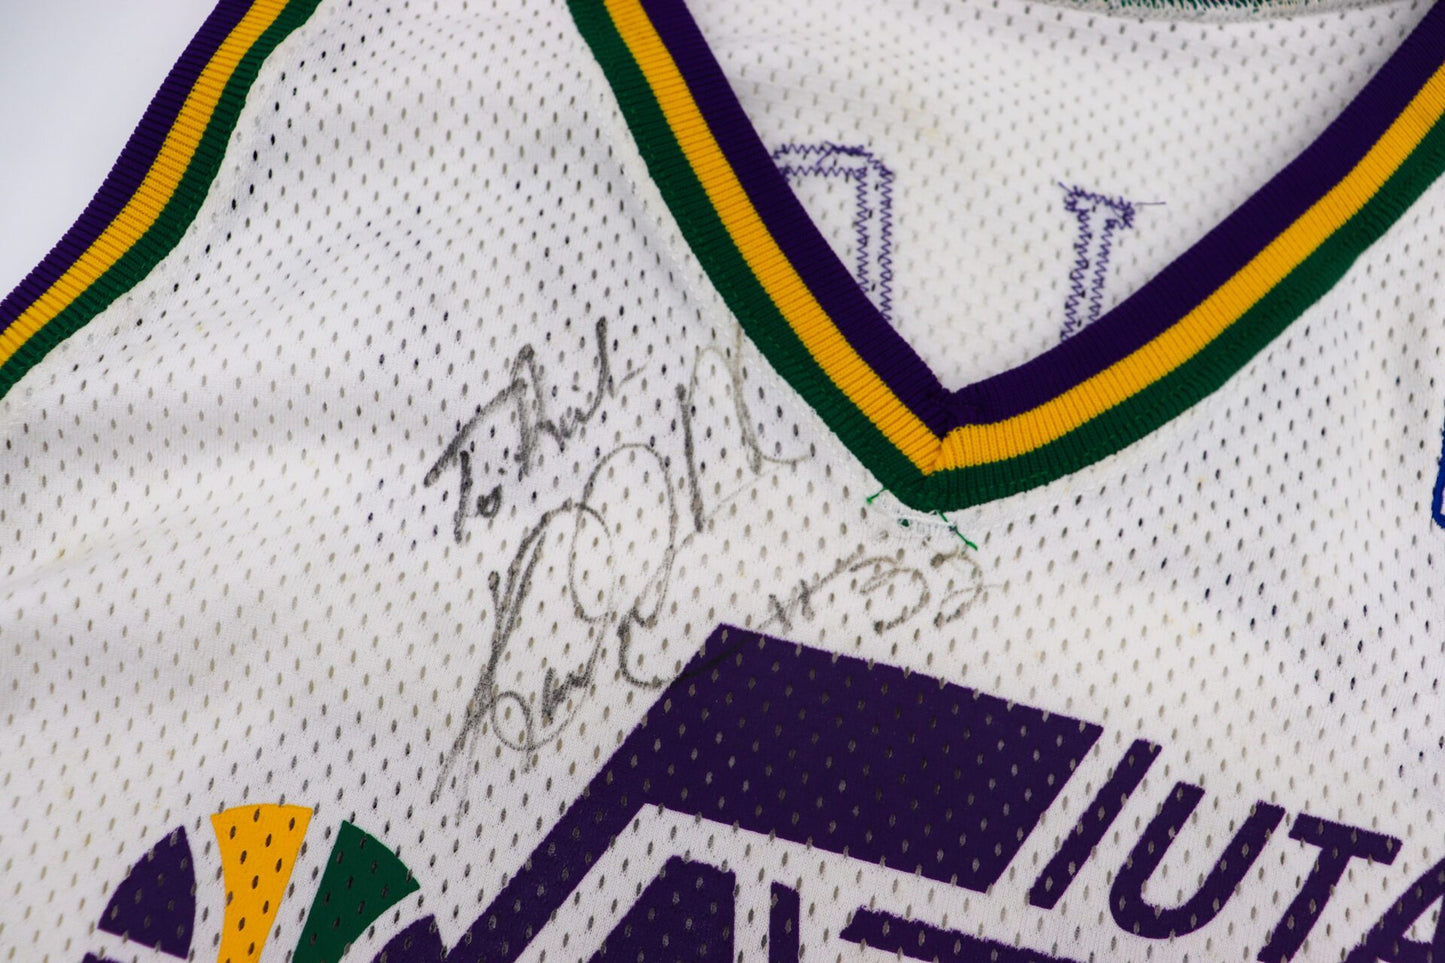 Game Worn & Autographed 1995-96 #32 Karl Malone Home White Utah Jazz Jersey with Certified Tags